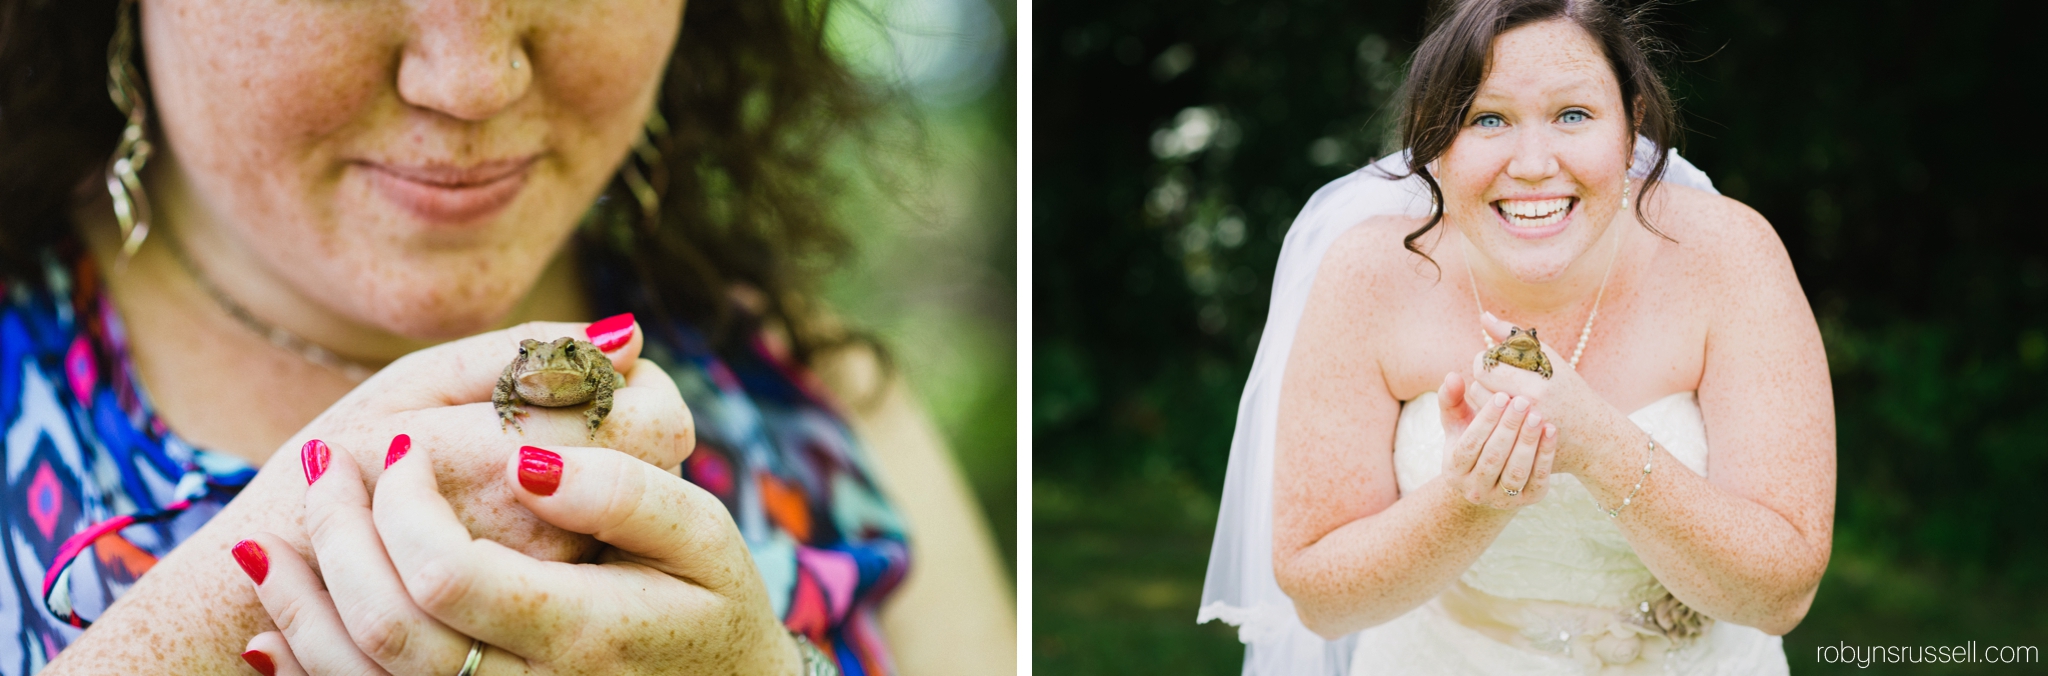 27-bride-and-the-frog-from-engagement-session-and-wedding.jpg